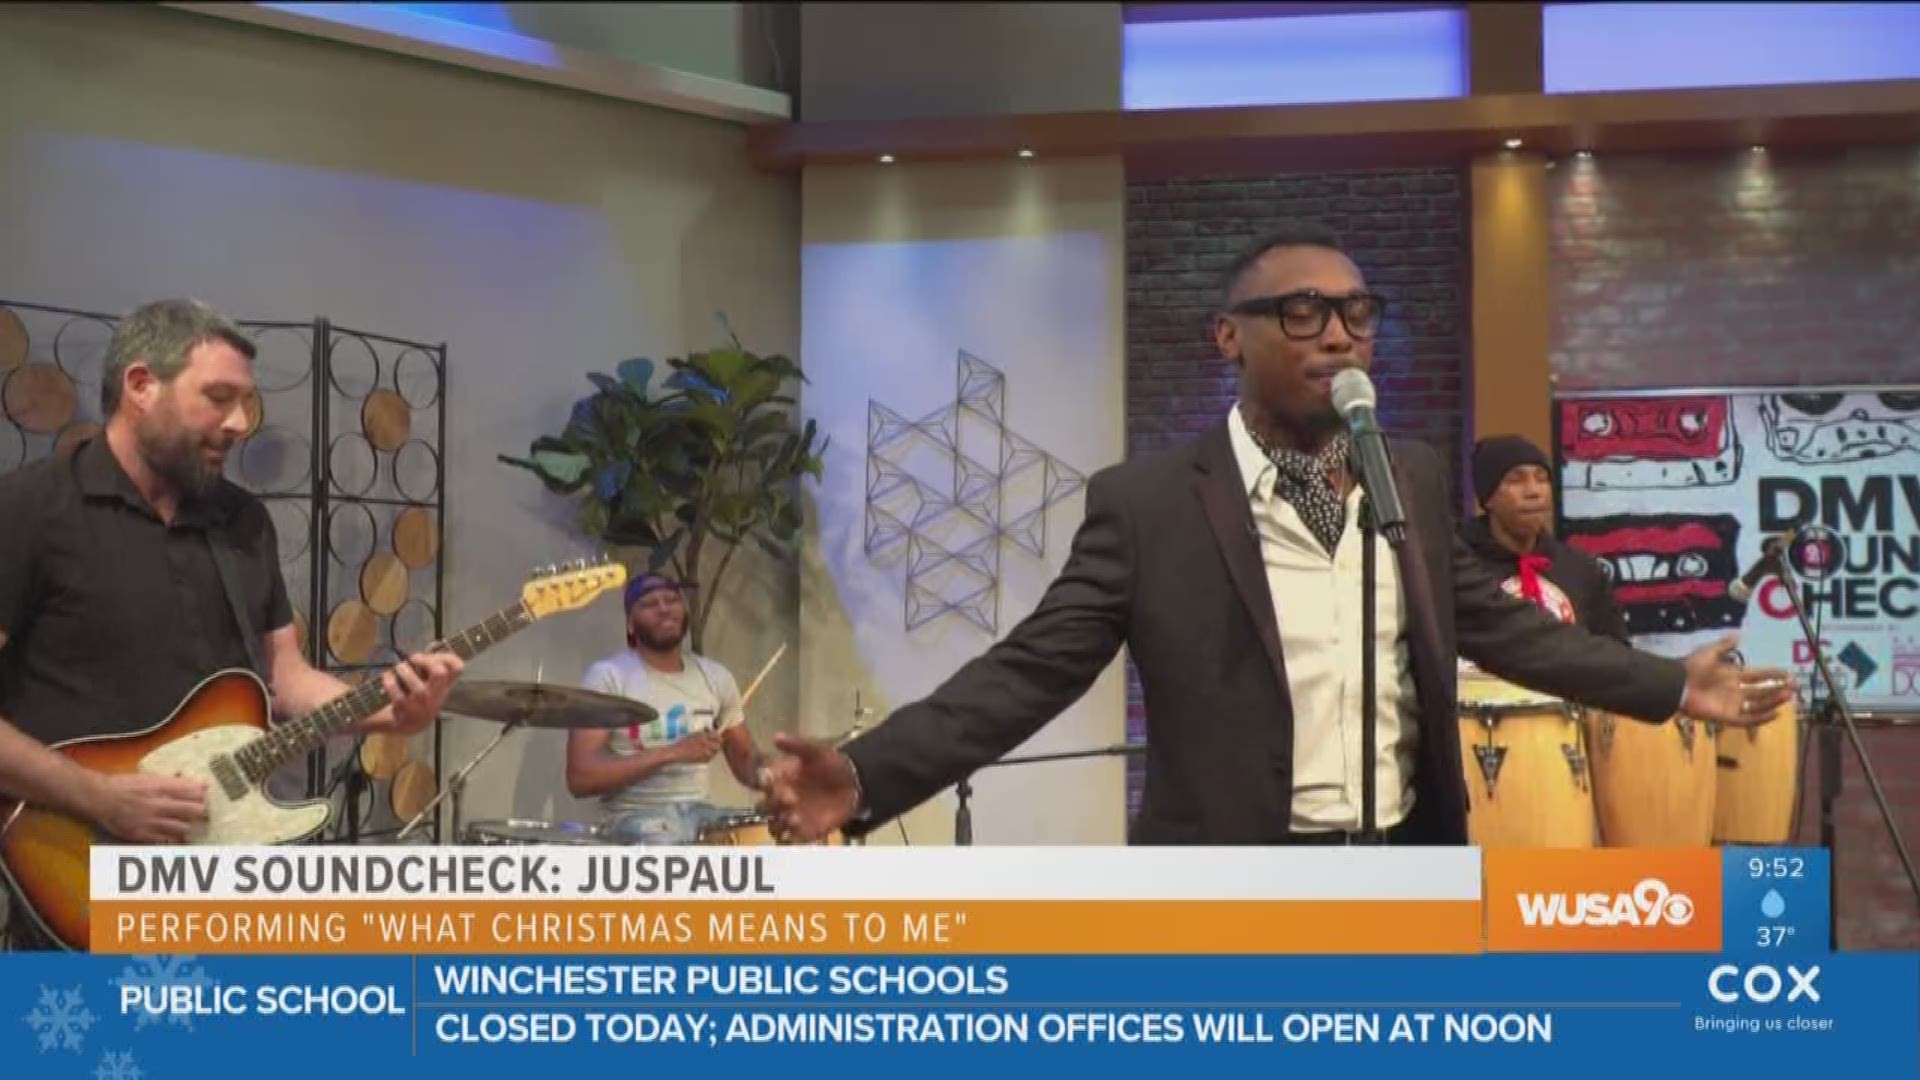 For this week's DMV Soundcheck performance, JusPaul adds a go-go flavor to a classic Christmas hit. This segment was sponsored by the DC OCTFME.